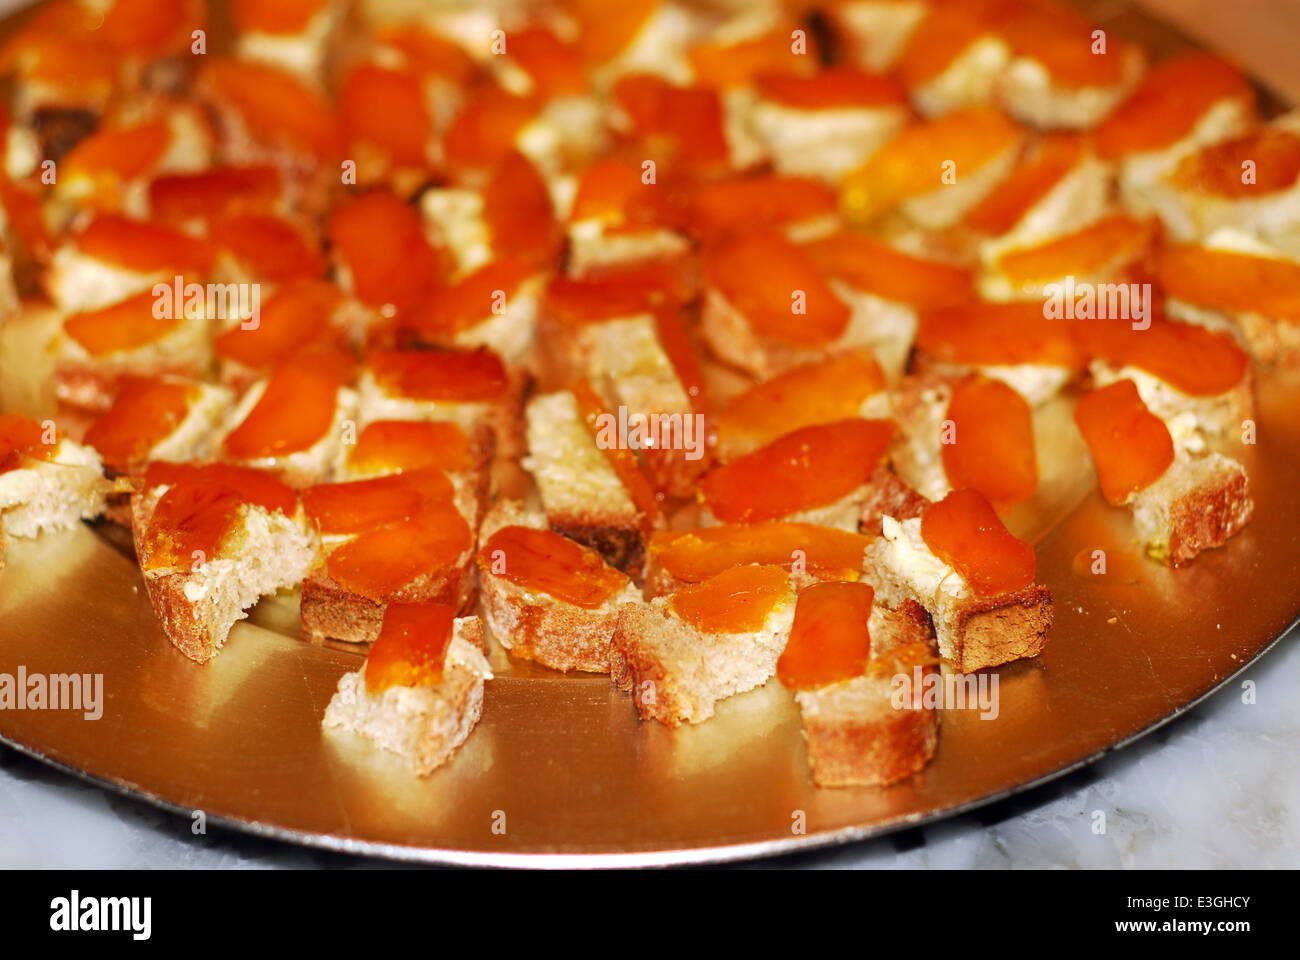 A plate of sliced botargo on buttered bread as appetizers Stock Photo